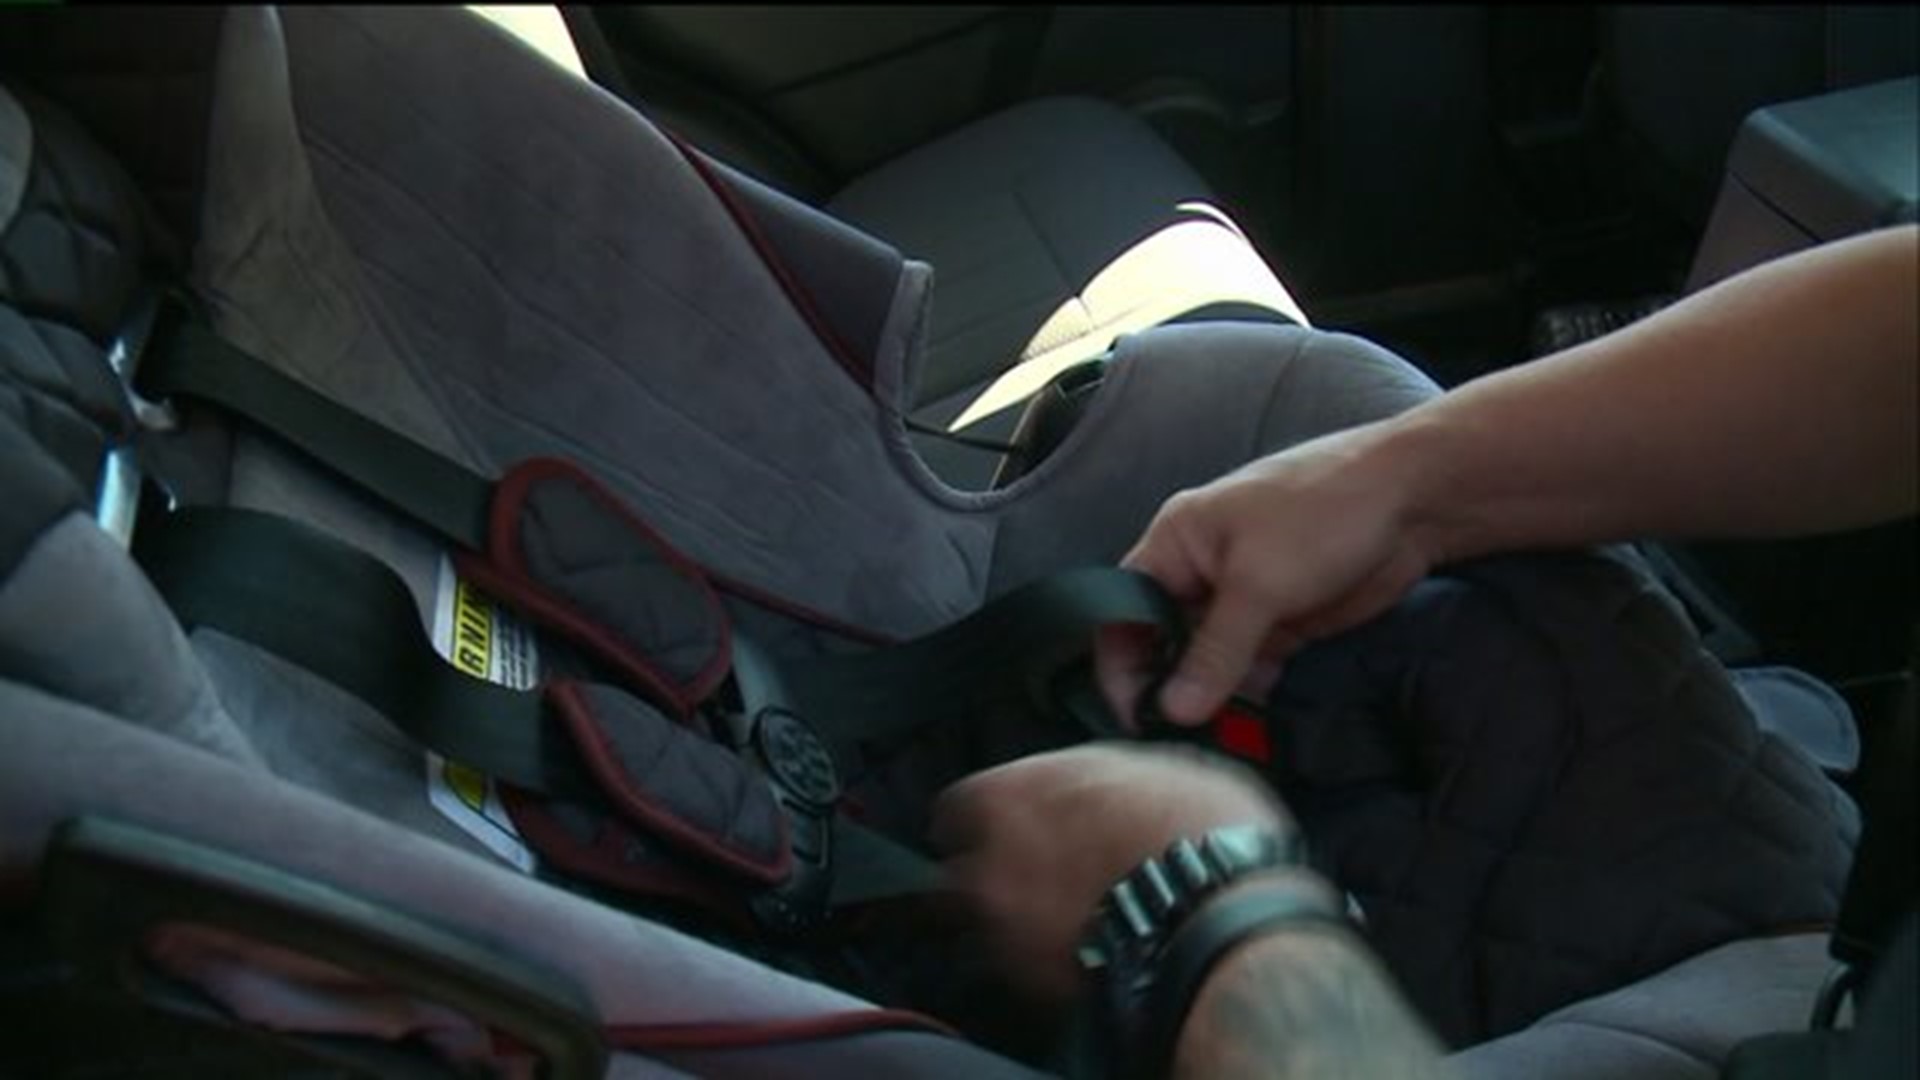 Event, officers ensure car seats are safe